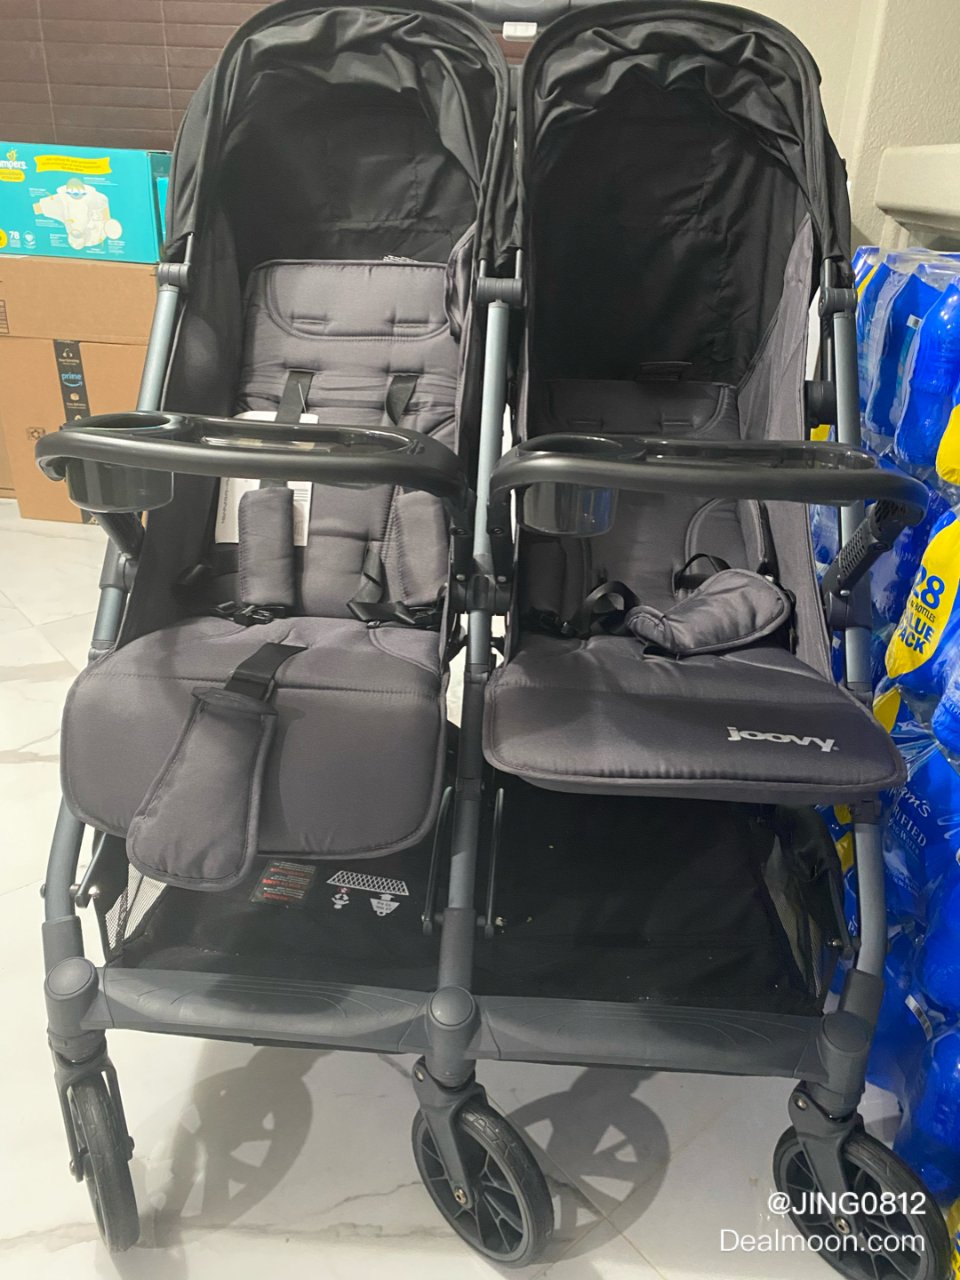 Joovy Kooper X2 Side-by-Side Double Stroller Featuring Dual Snack Trays, One-Handed Fold, Multi-Position Reclining Seats, Adjustable Leg Rests, and 2 Zippered Pockets for Storage, Forged Iron : Baby 双人推车/双人童车/Joovy轻便双人推车/,Joovy